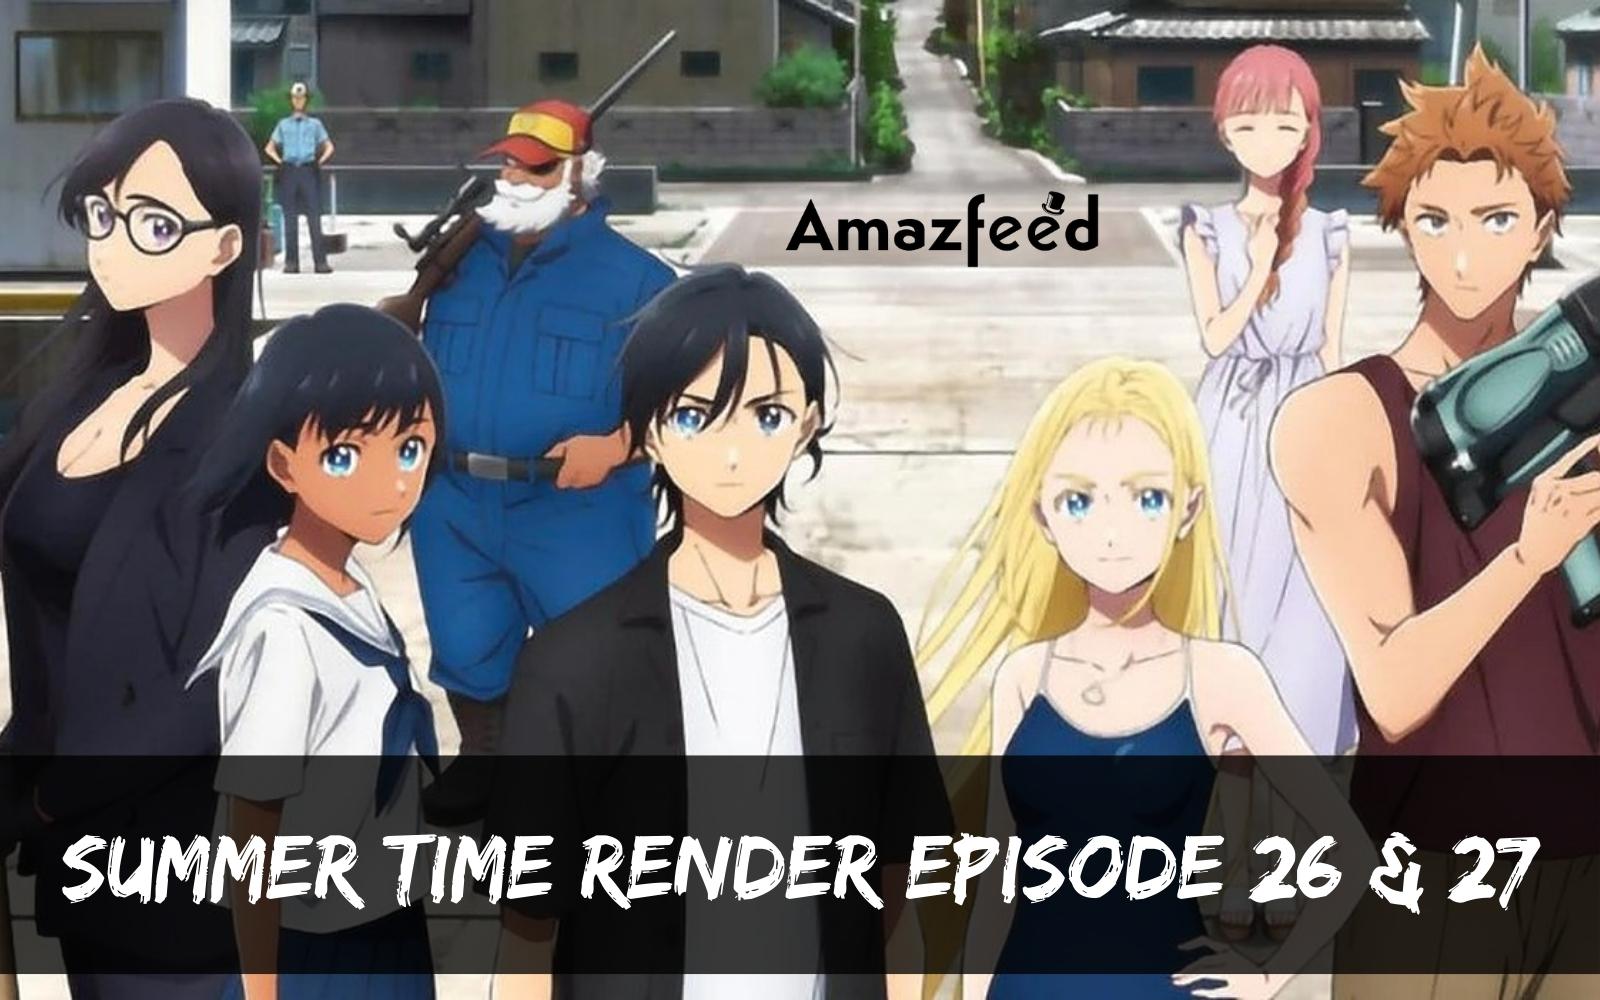 Is Summertime Render Episode 26 & 27 Coming or Not? Is Summertime Render Season 1 Ended? Know more about Summertime Render Season 1